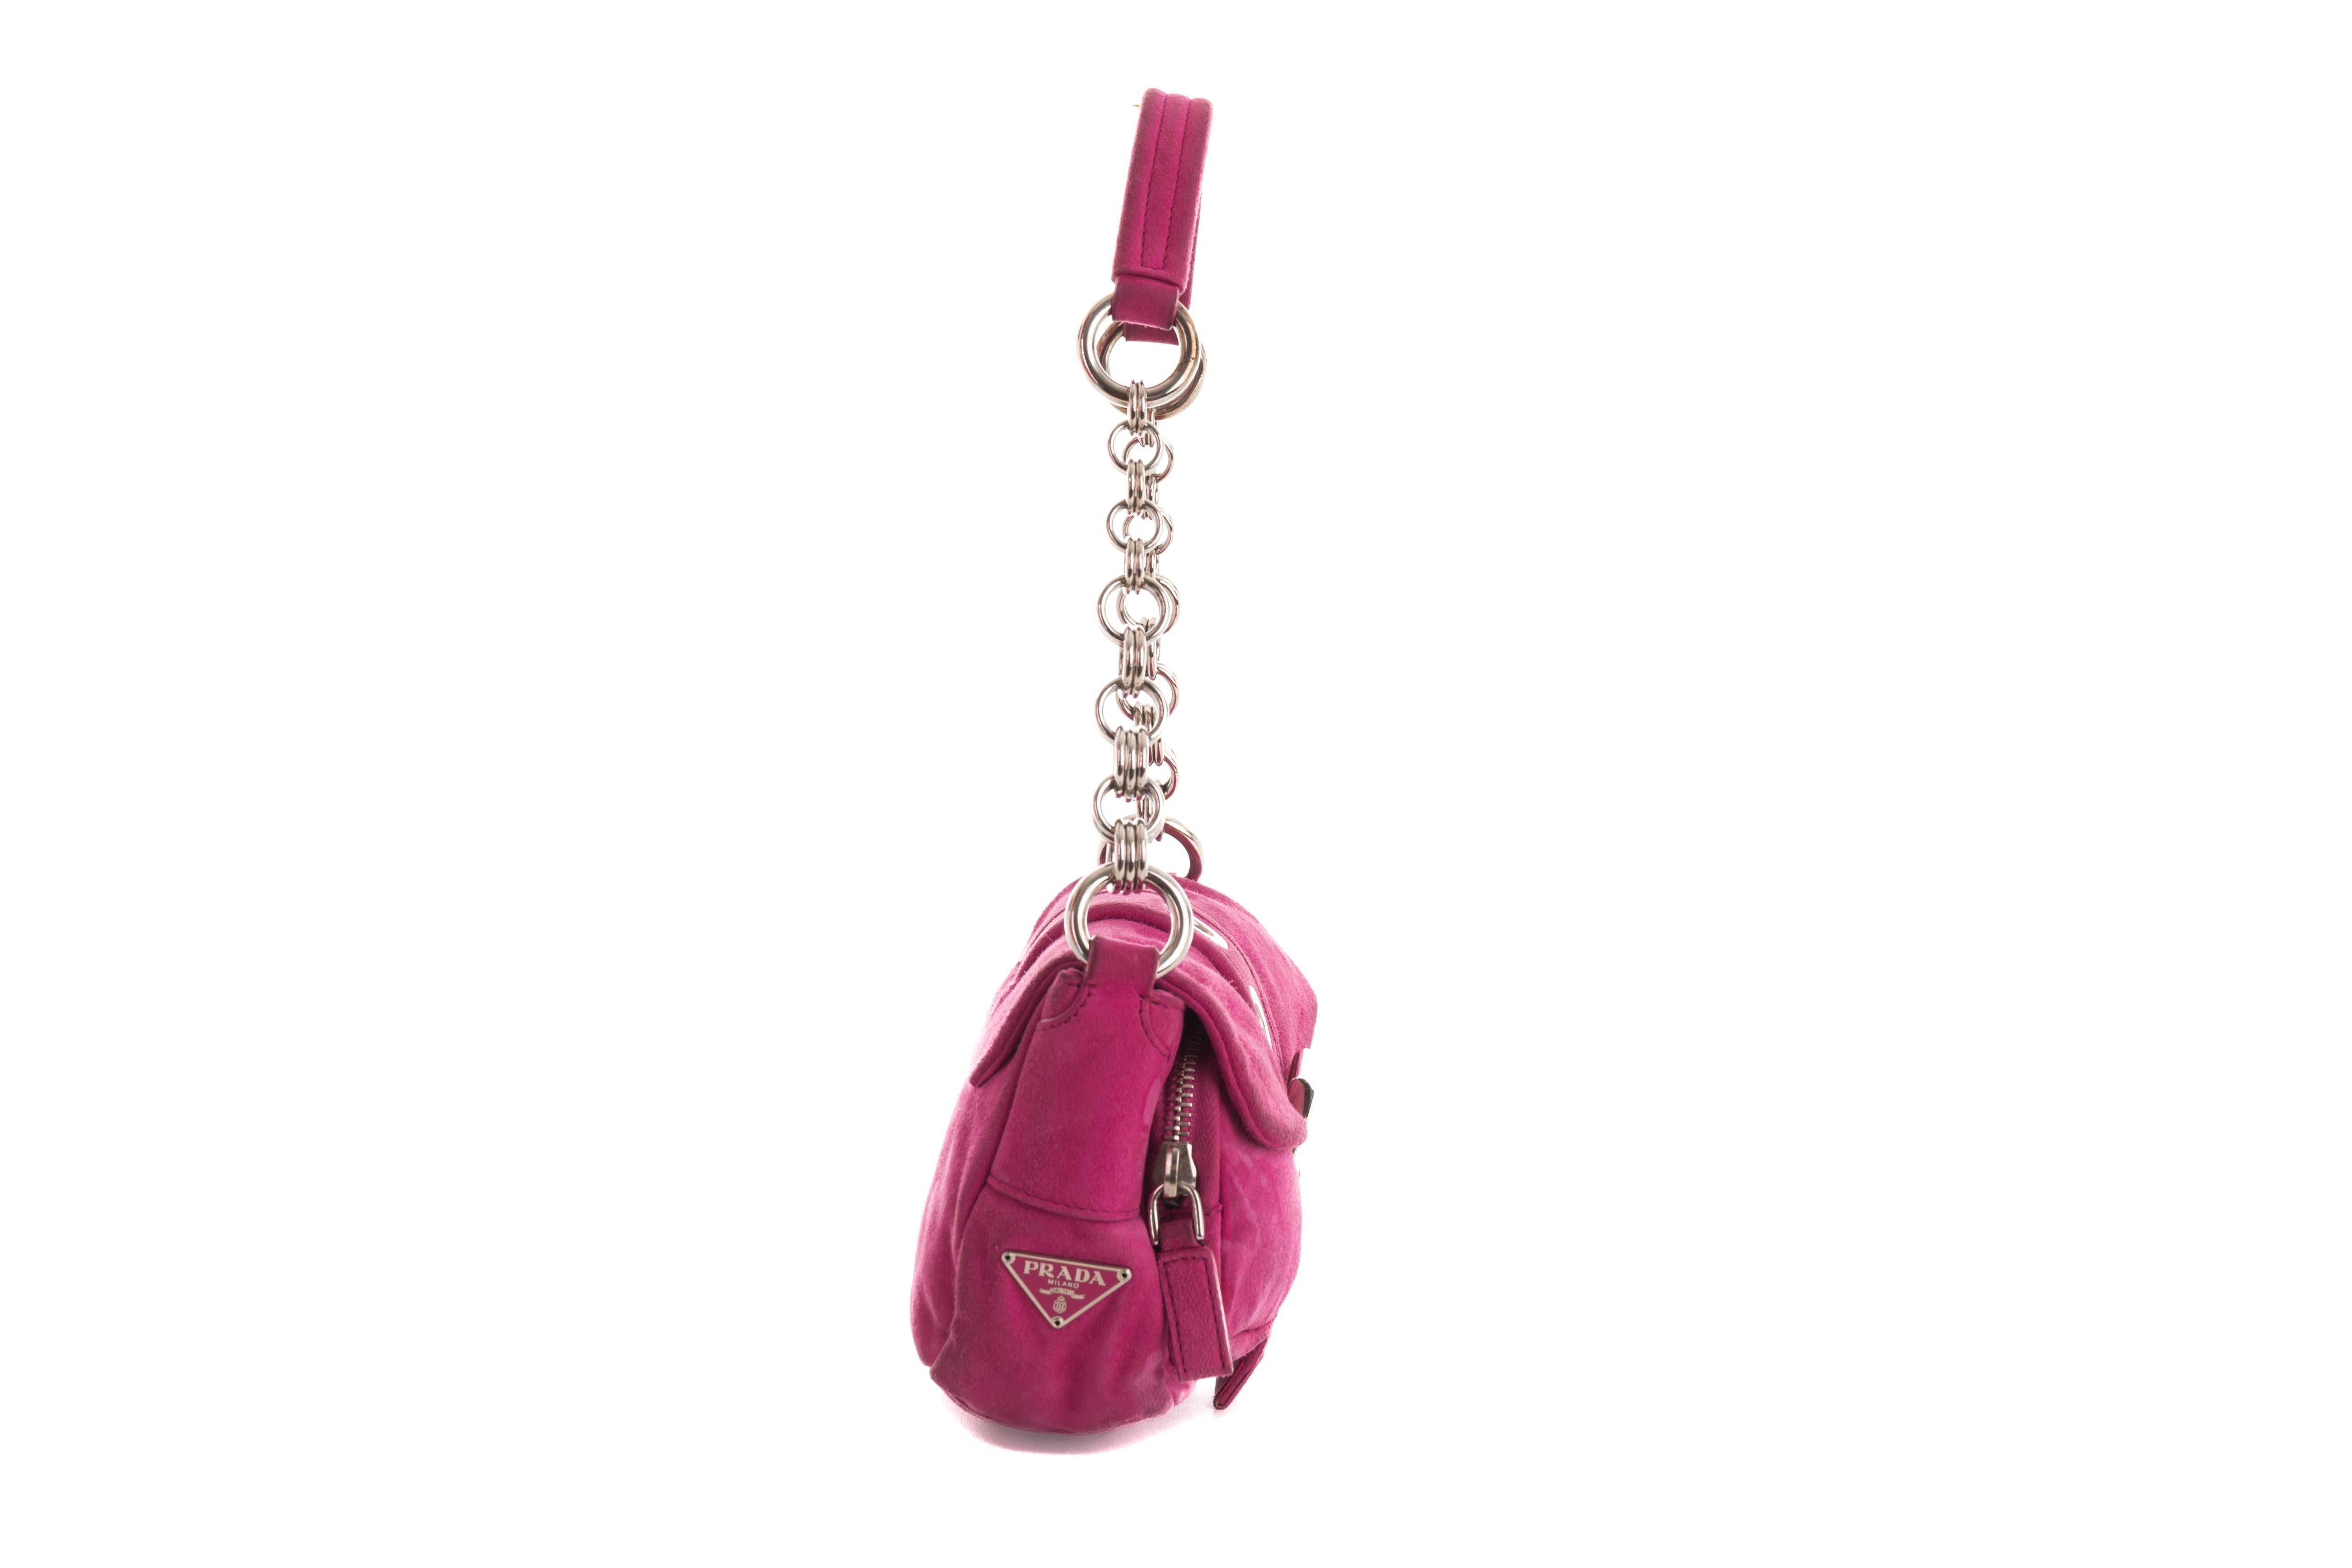 - Prada by Miuccia Prada
- Spring-summer 2004 collection
- Sold by Gold Palms Vintage
- Fuchsia suede mini bag
- Side pink logo
- Front double pocket and grommet belt
- Metal chain + suede strap
- Leather discoloration on the front (reflected on